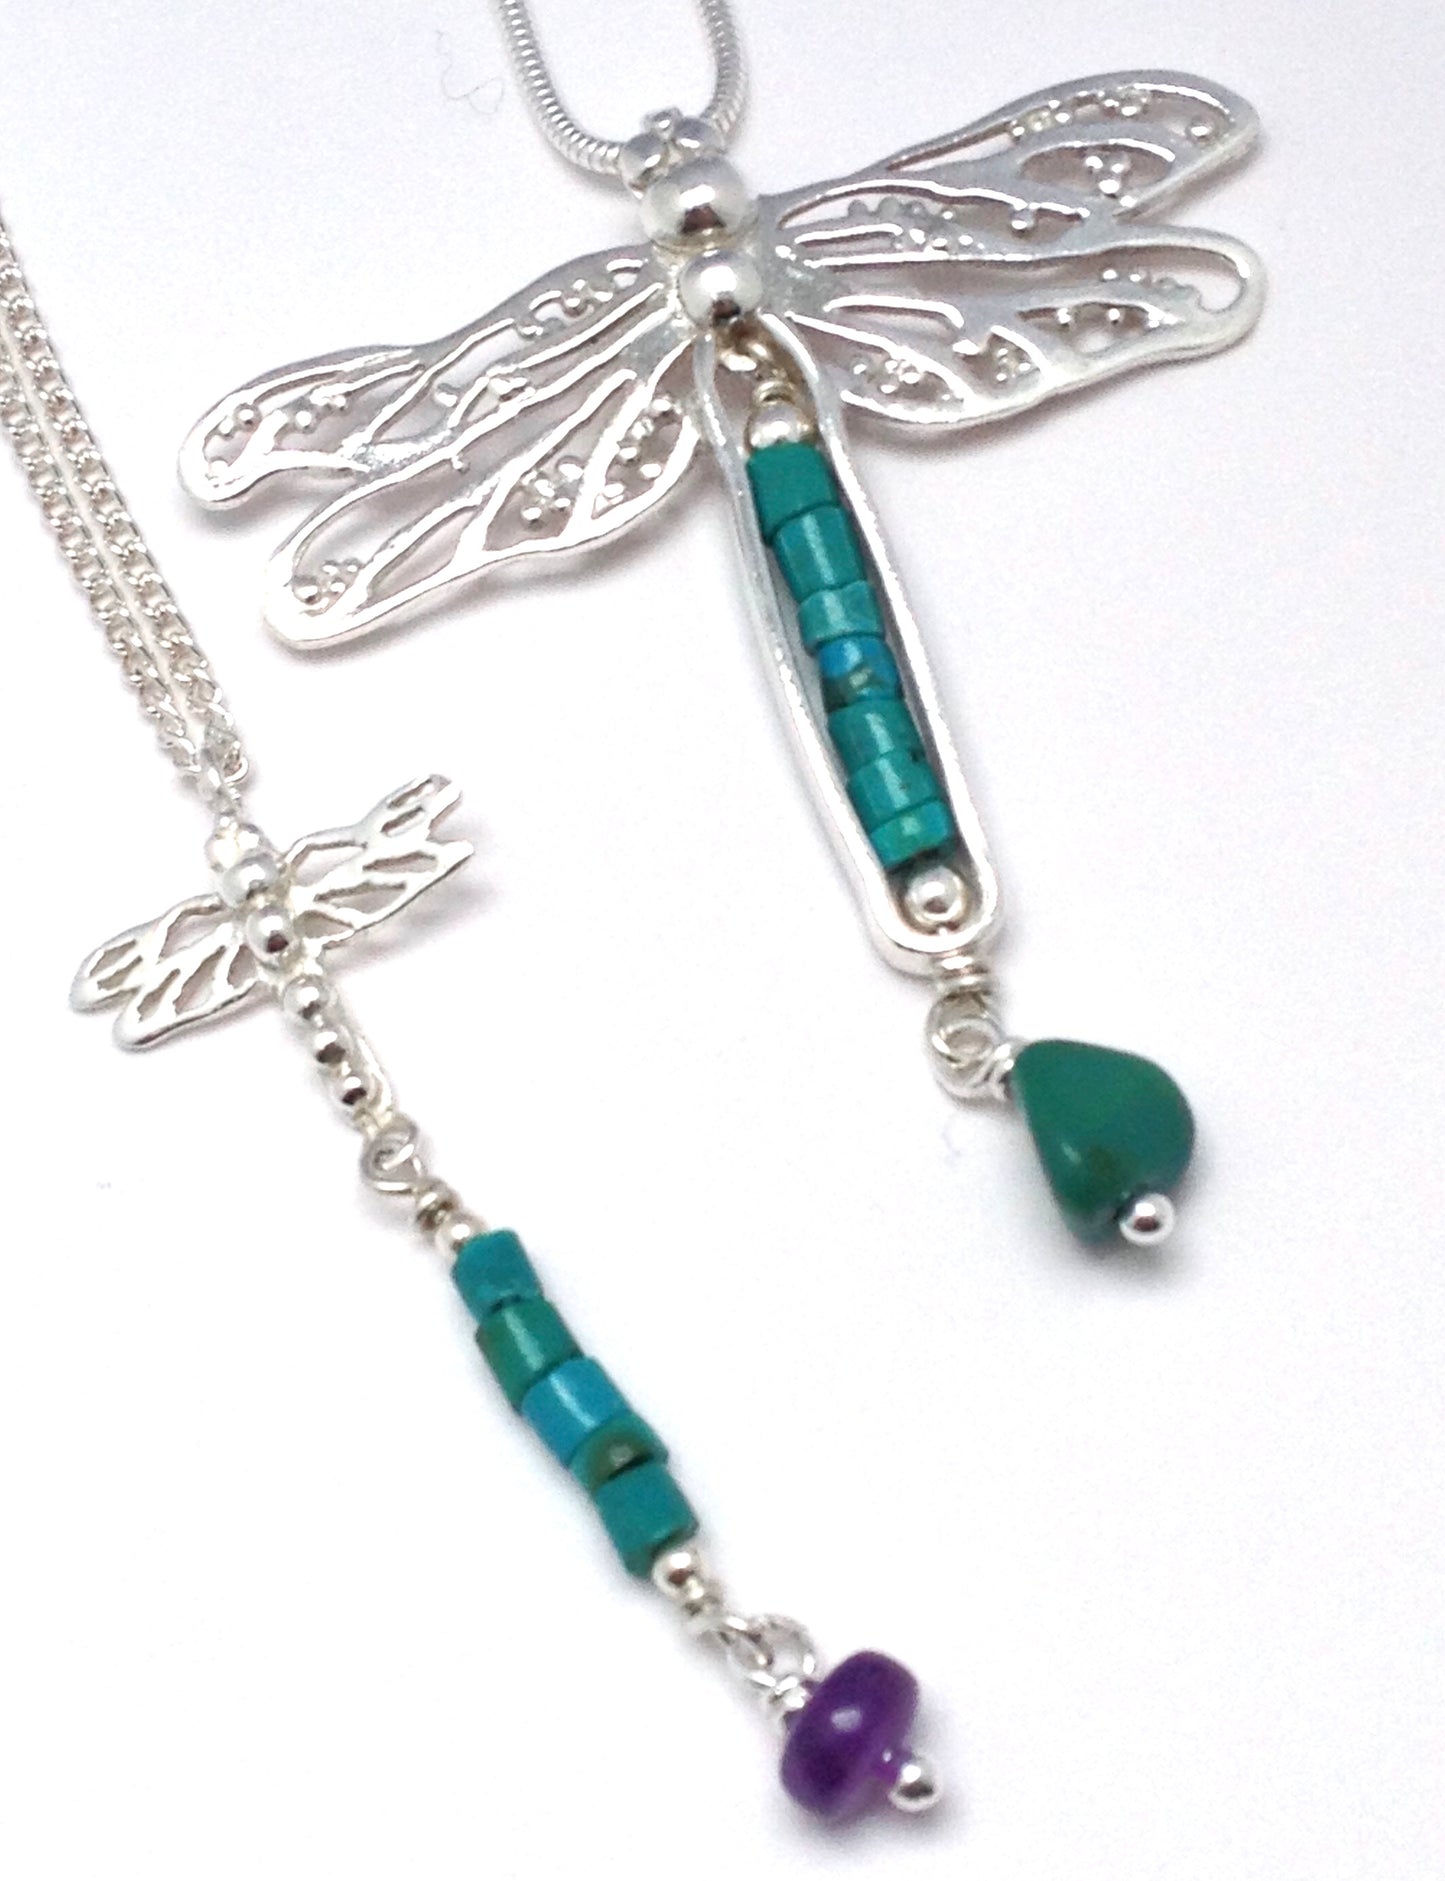 Turquoise dragonfly necklace